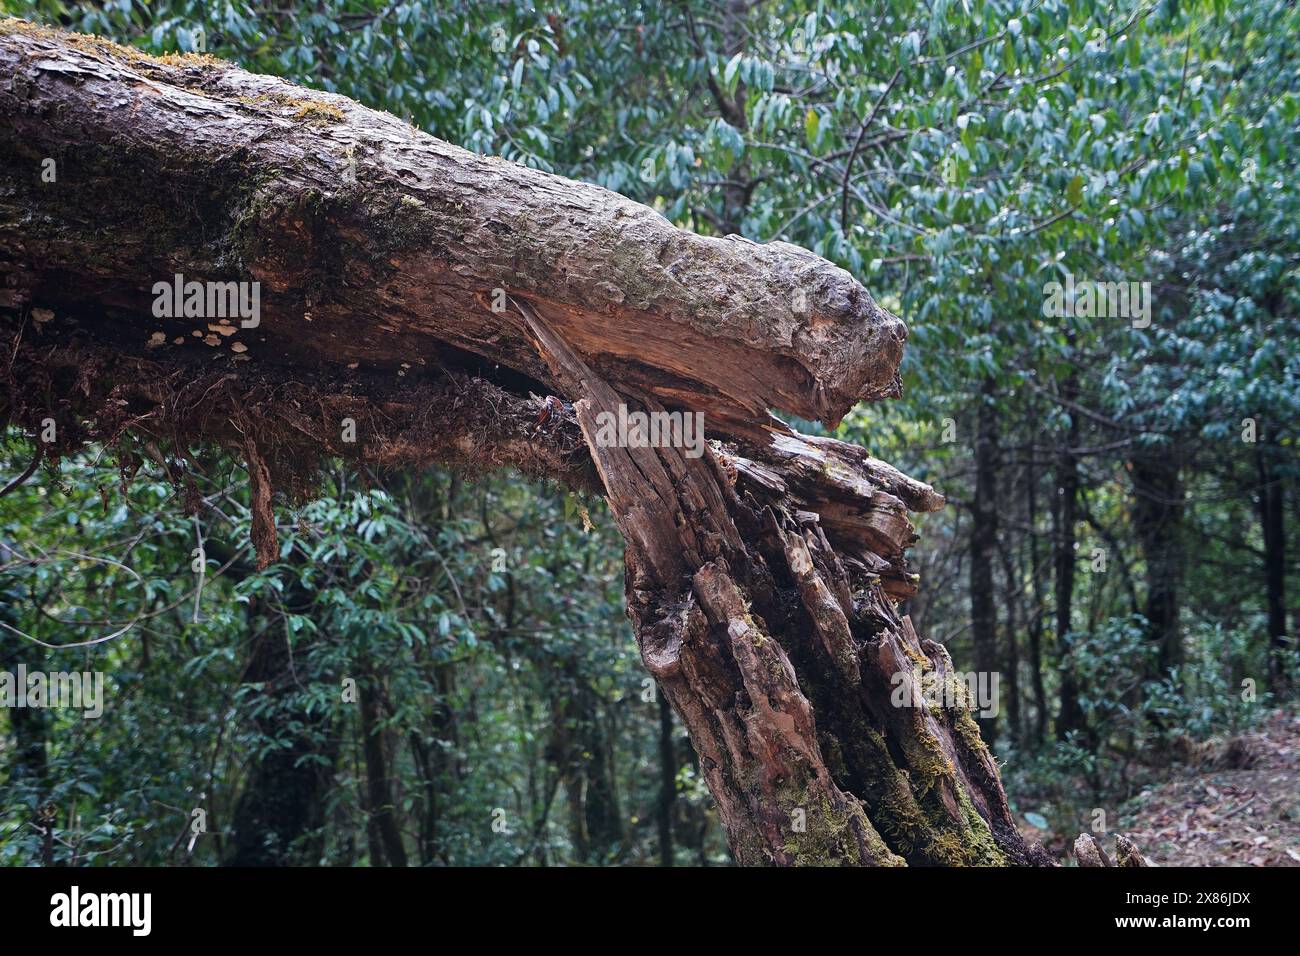 Close up fell down tree in natural green forest park Stock Photo